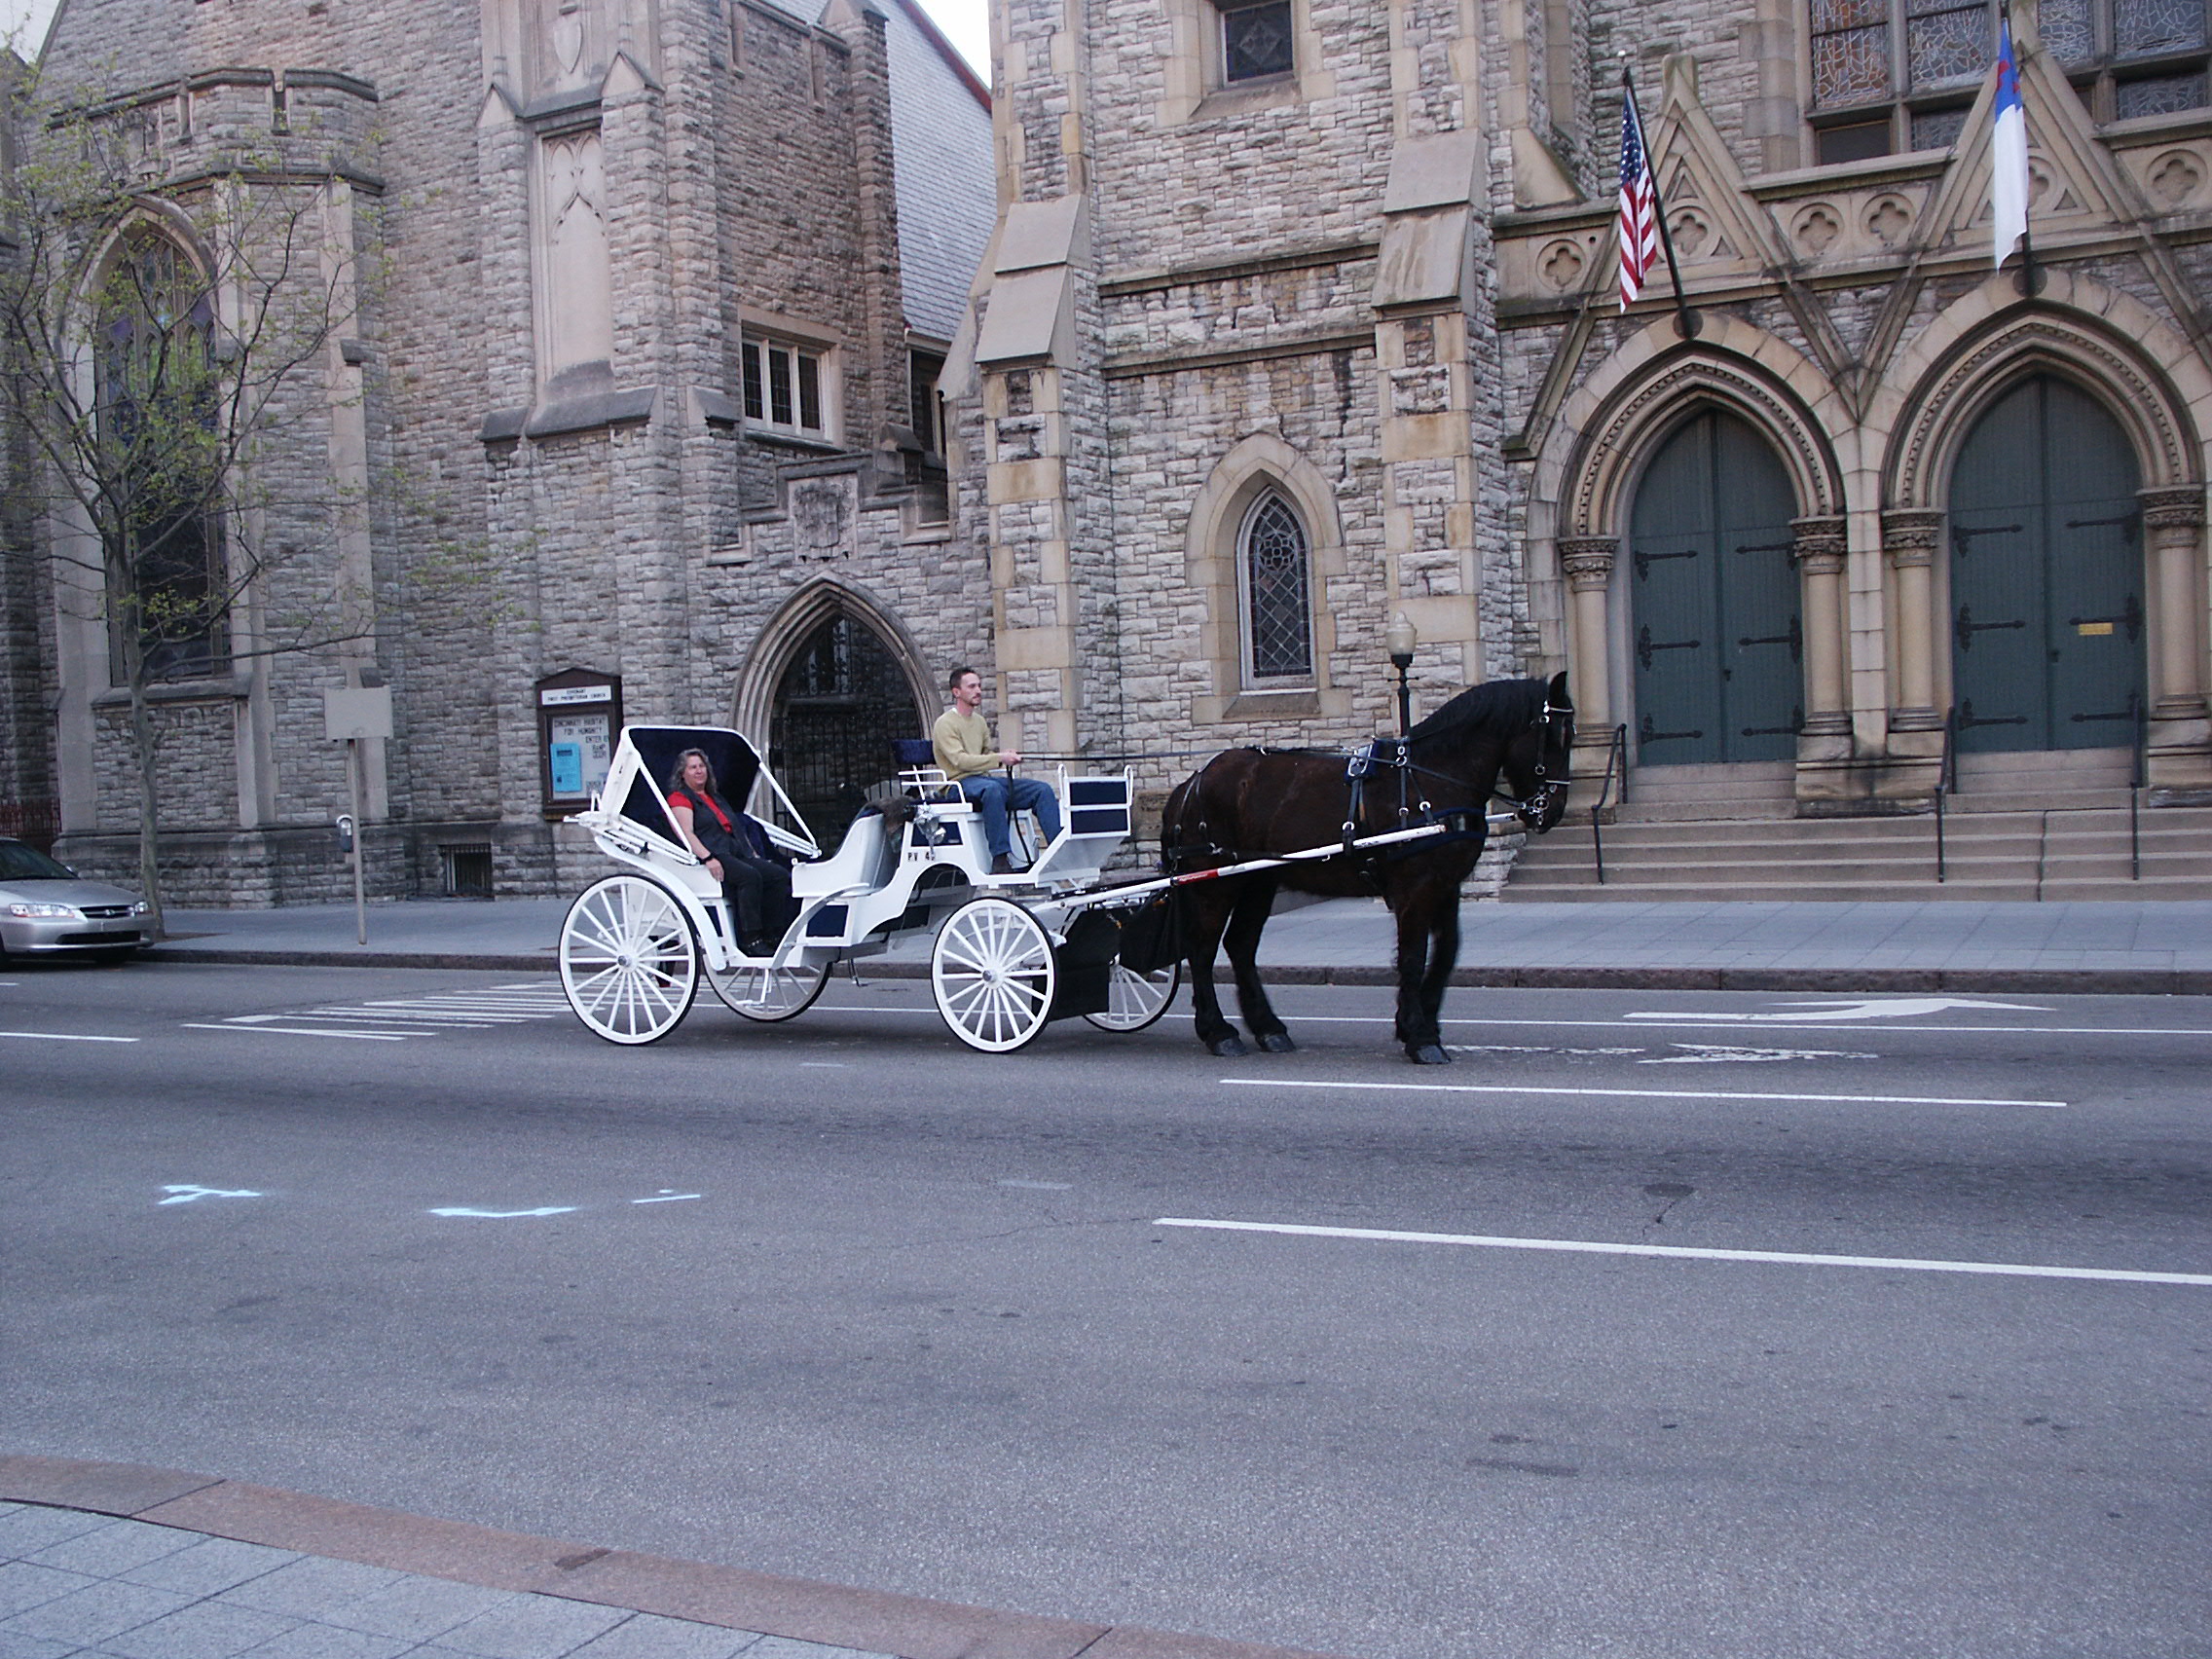 Enjoying some of the historic churches that a horse and carriage ride around Cincinnati offers